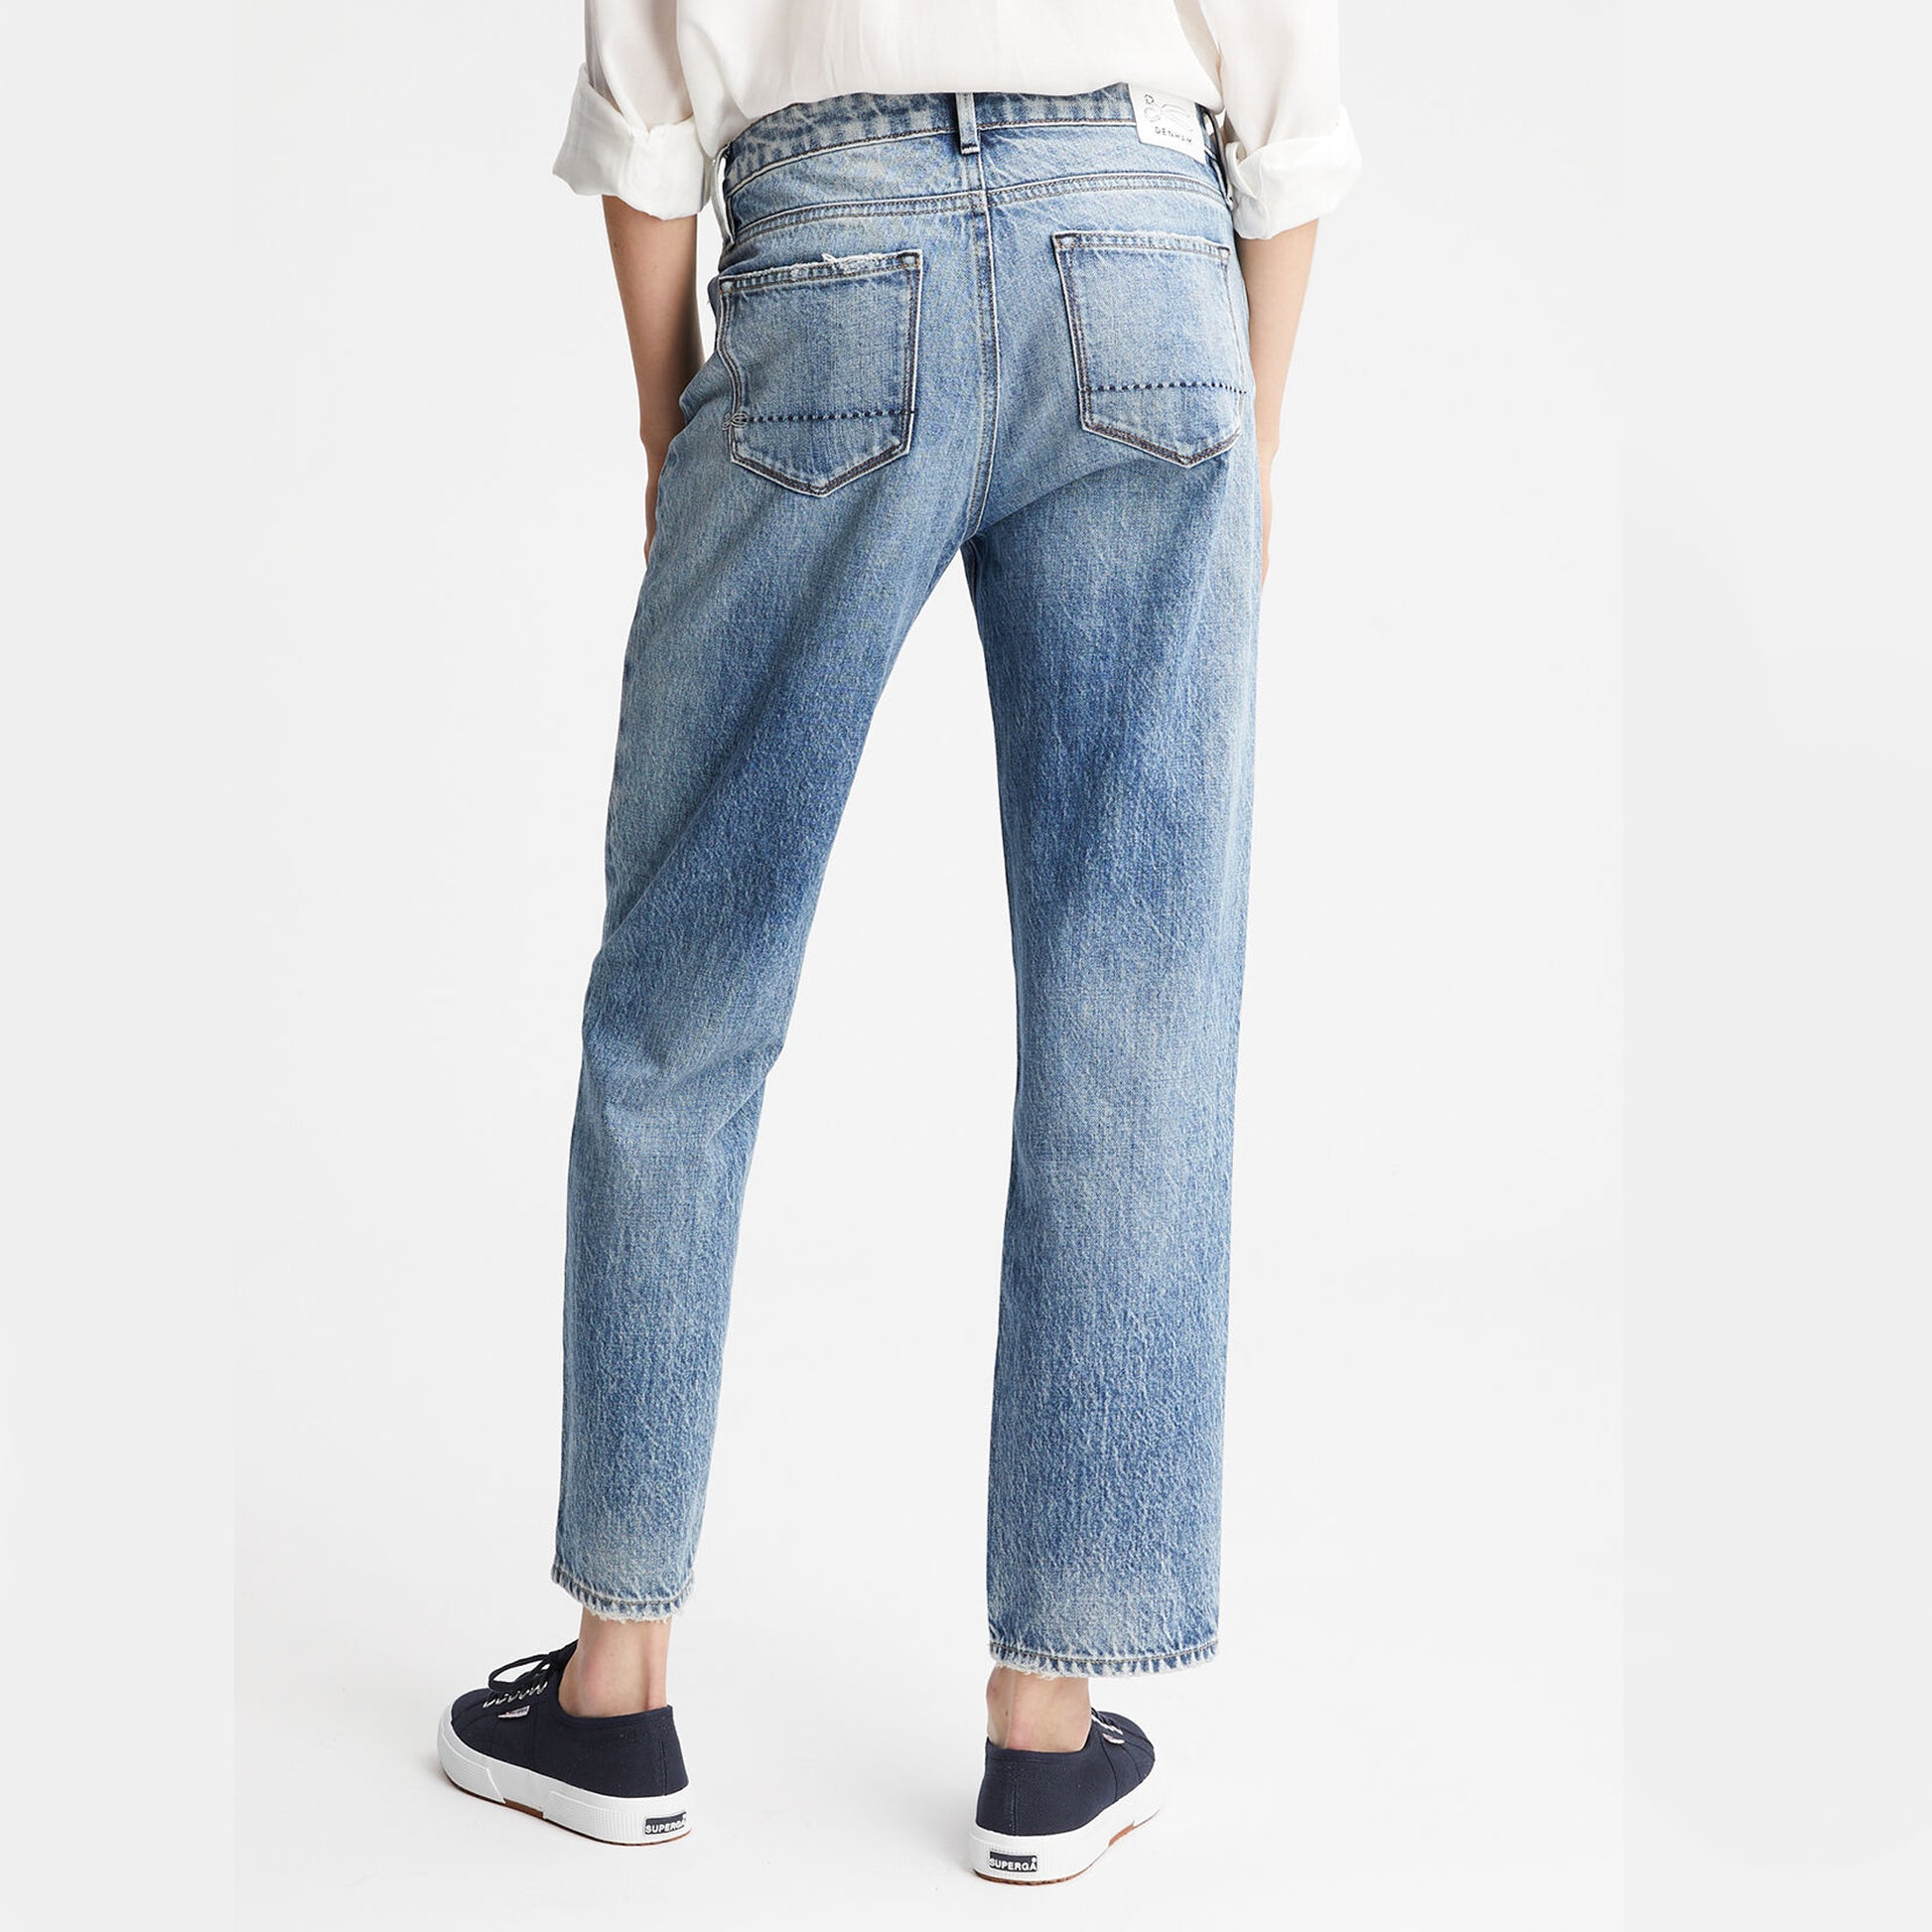 The back view of a woman wearing a pair of Denham BARDOT Straight Leg - Stonewash Blue jeans, made from organic cotton using a sustainable process.